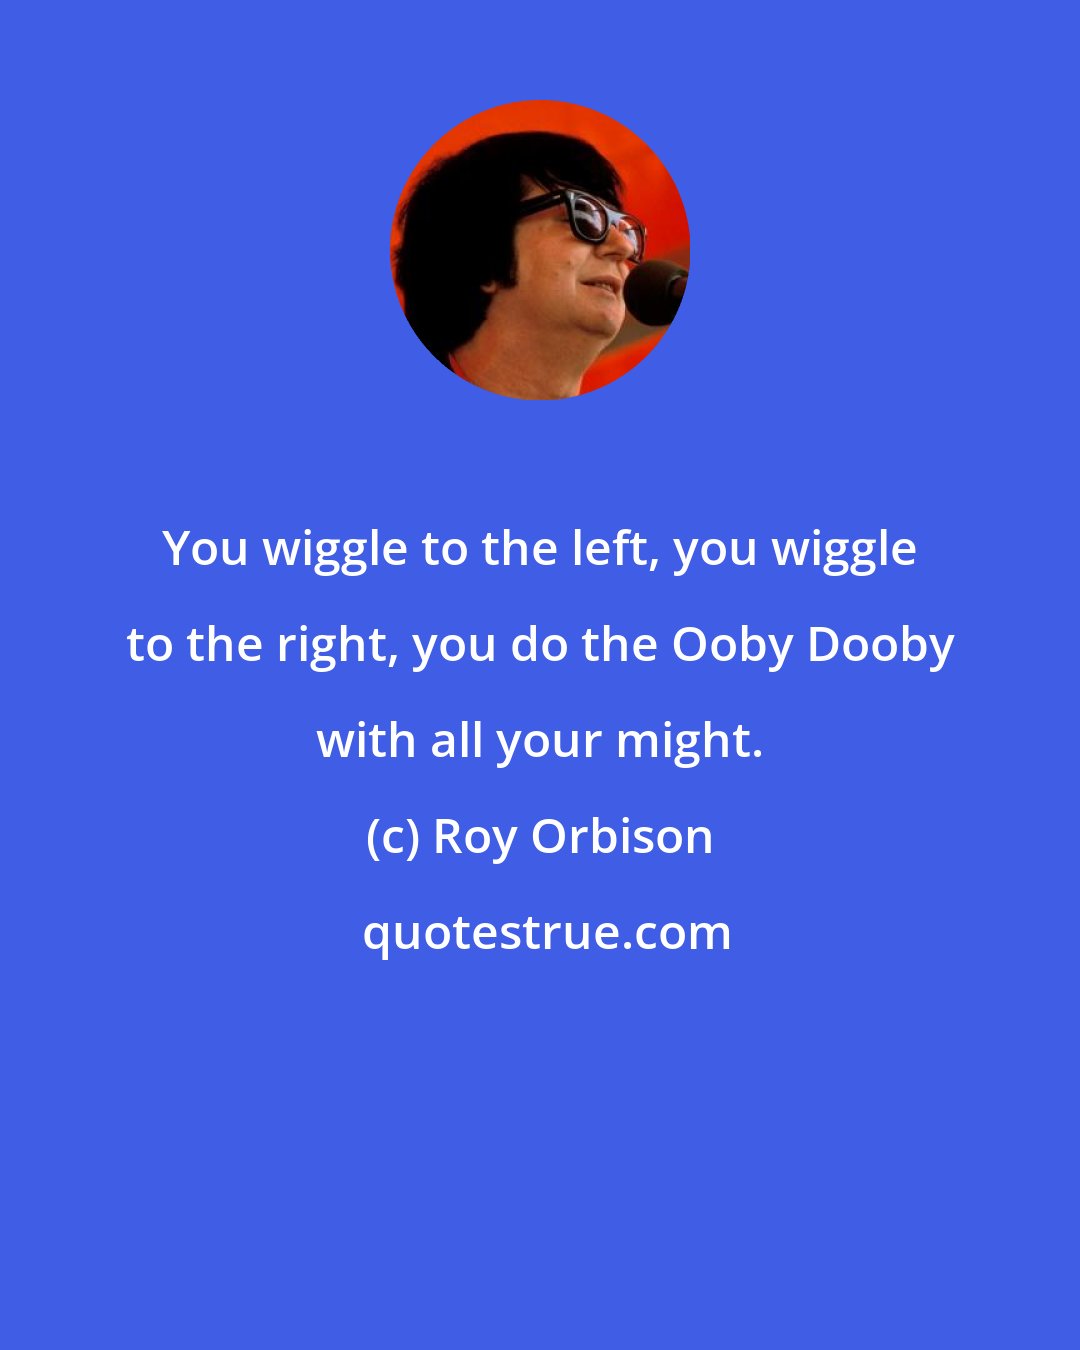 Roy Orbison: You wiggle to the left, you wiggle to the right, you do the Ooby Dooby with all your might.